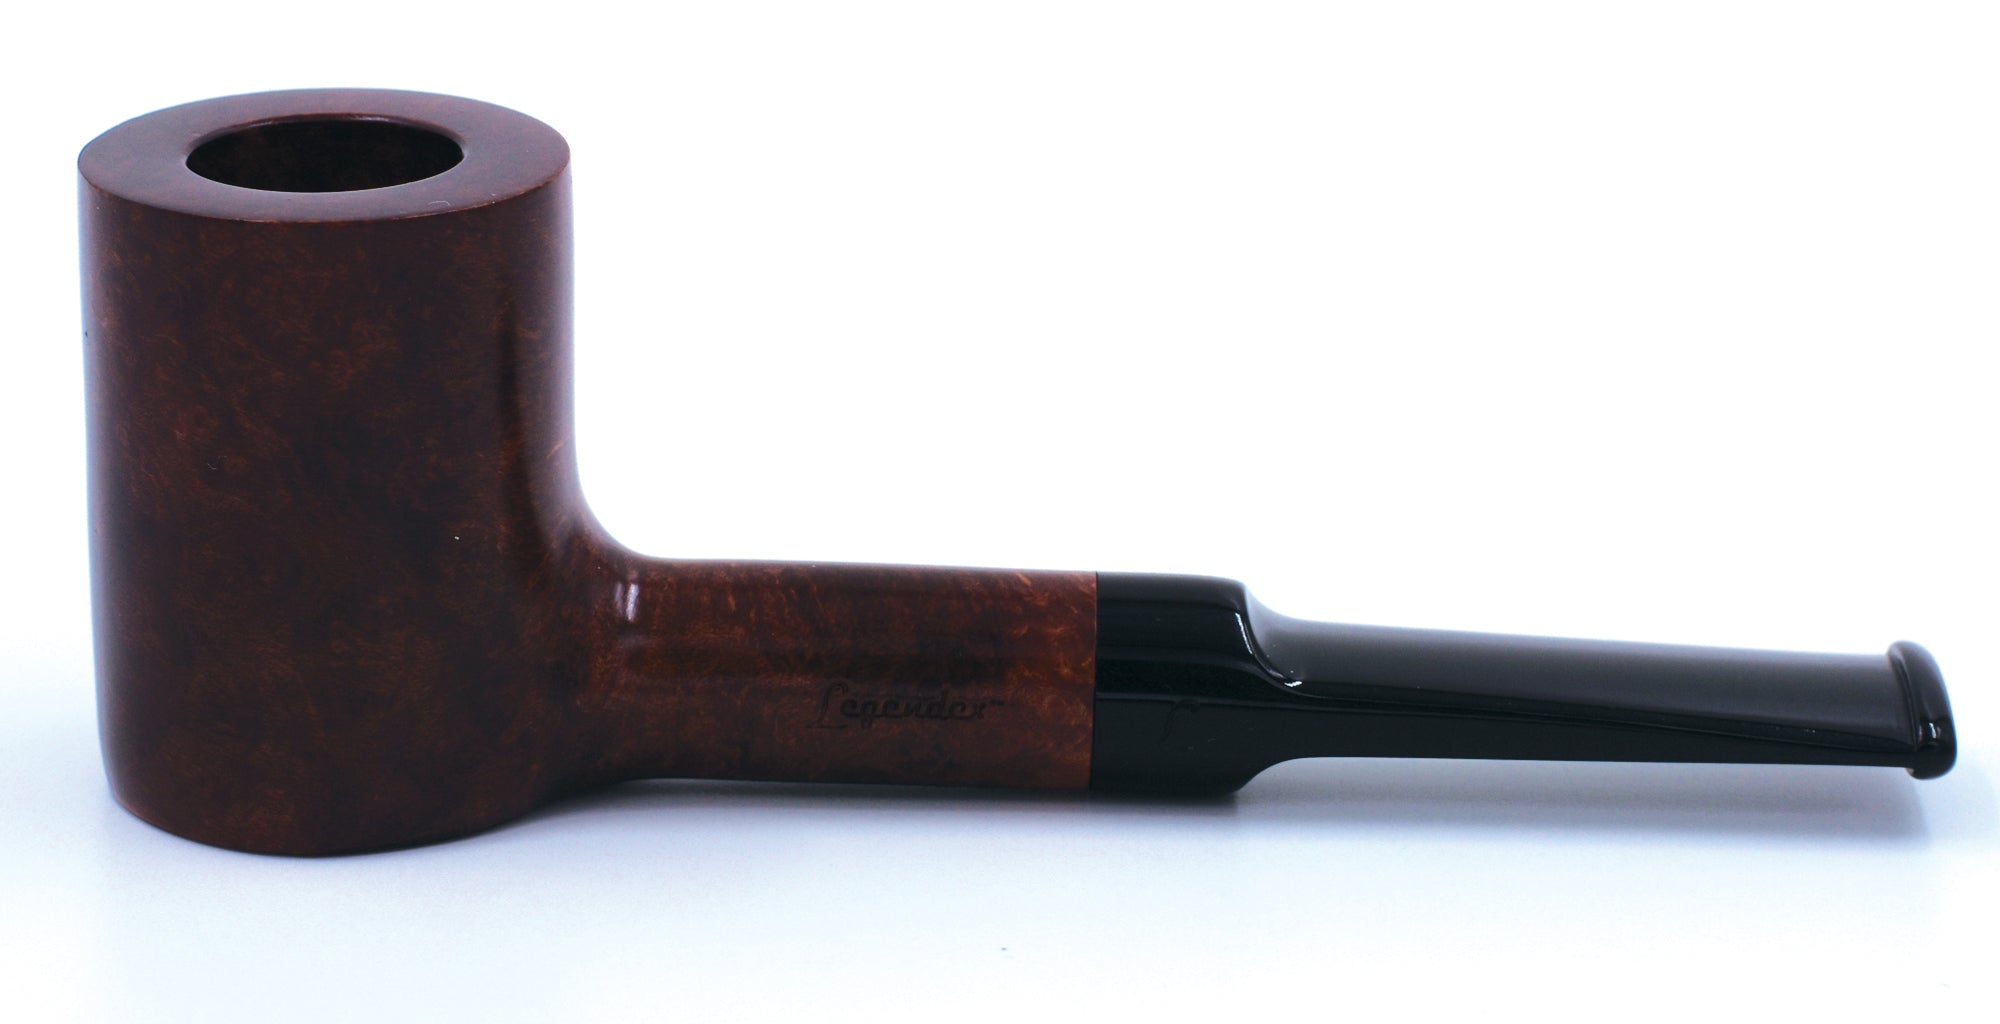 LEGENDEX® PAGANINI* 9 MM Filtered Briar Smoking Pipe Made In Italy 01-08-311